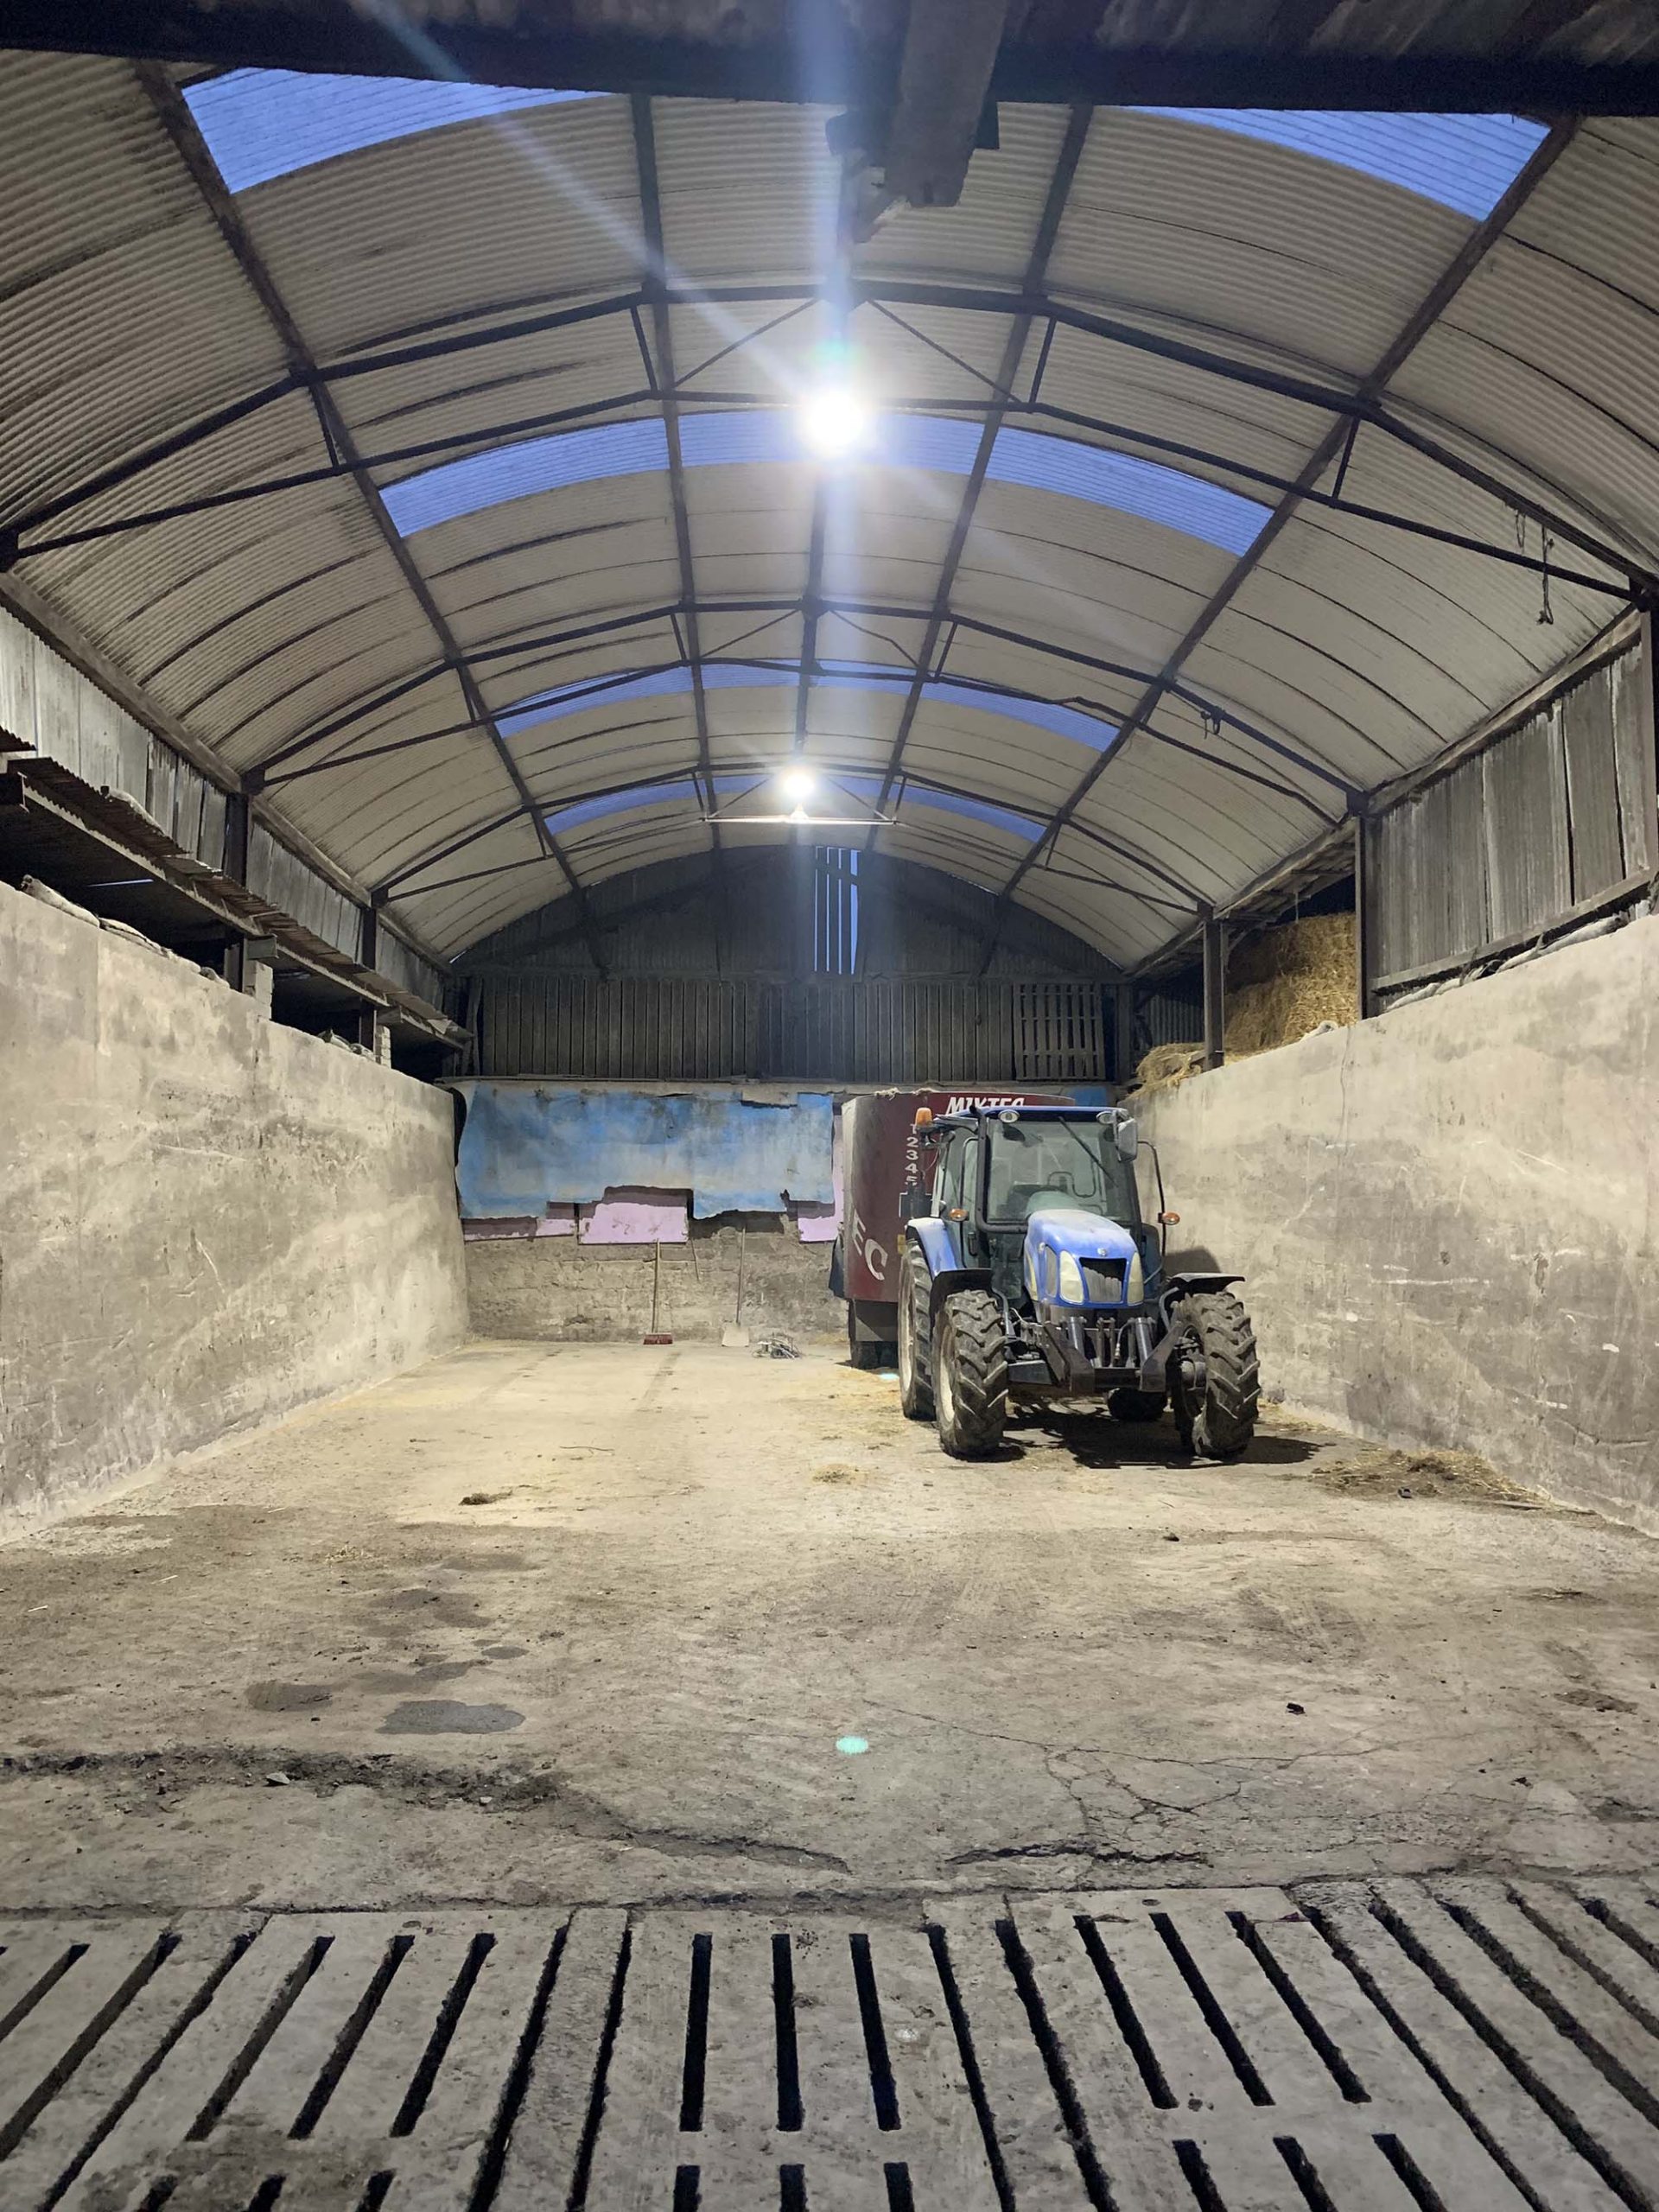 New lighting system in large hay barn